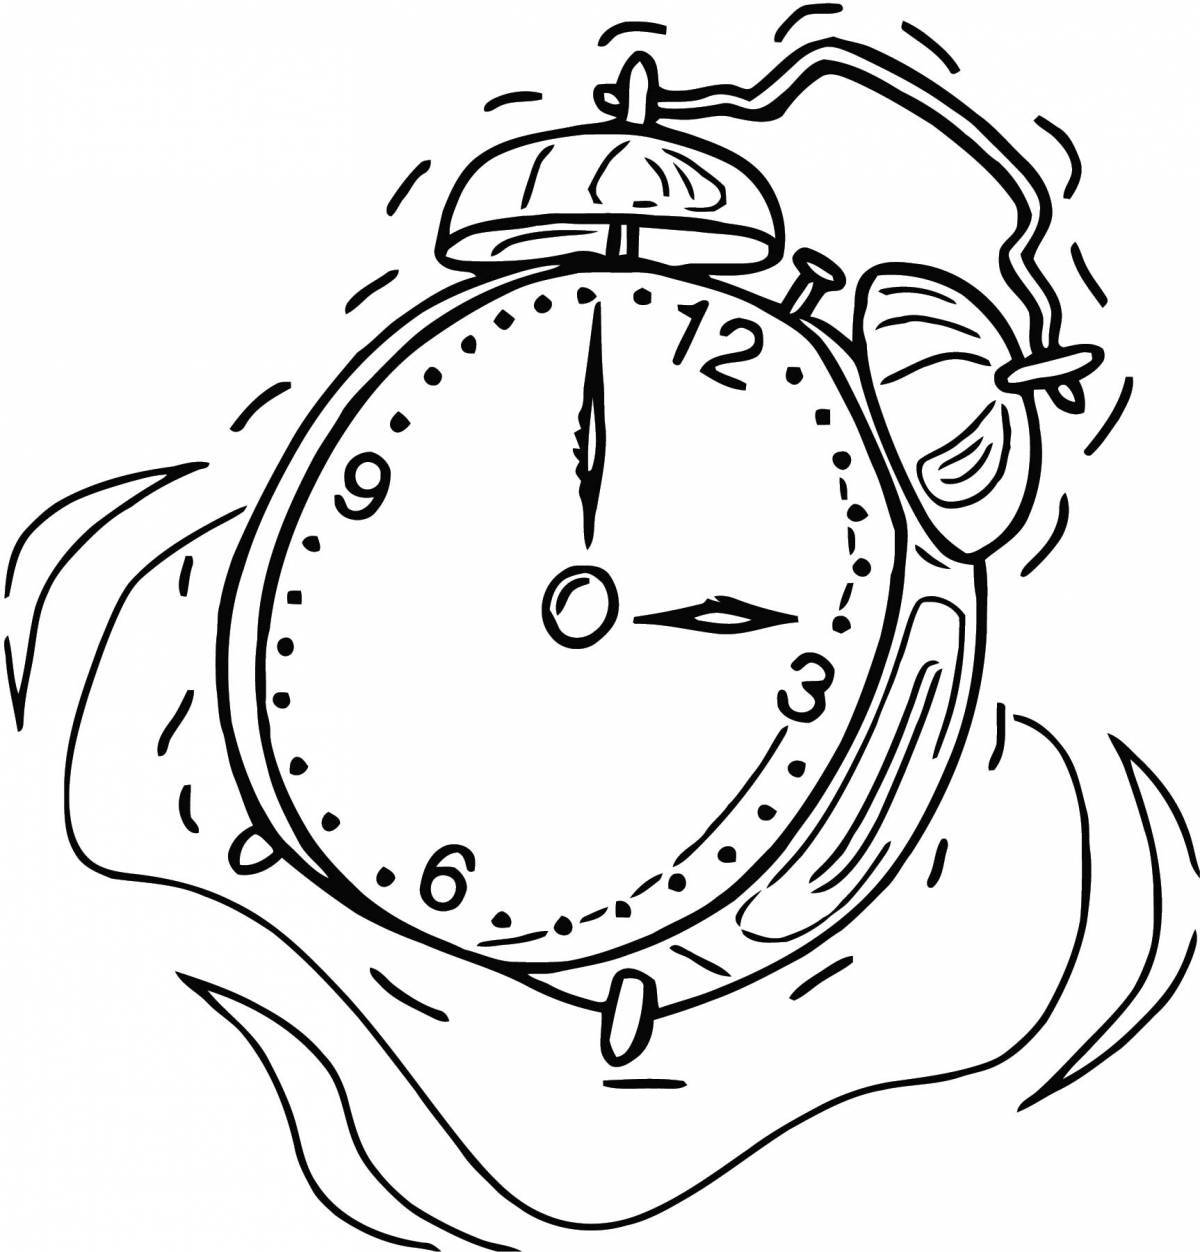 Exciting alarm clock coloring page